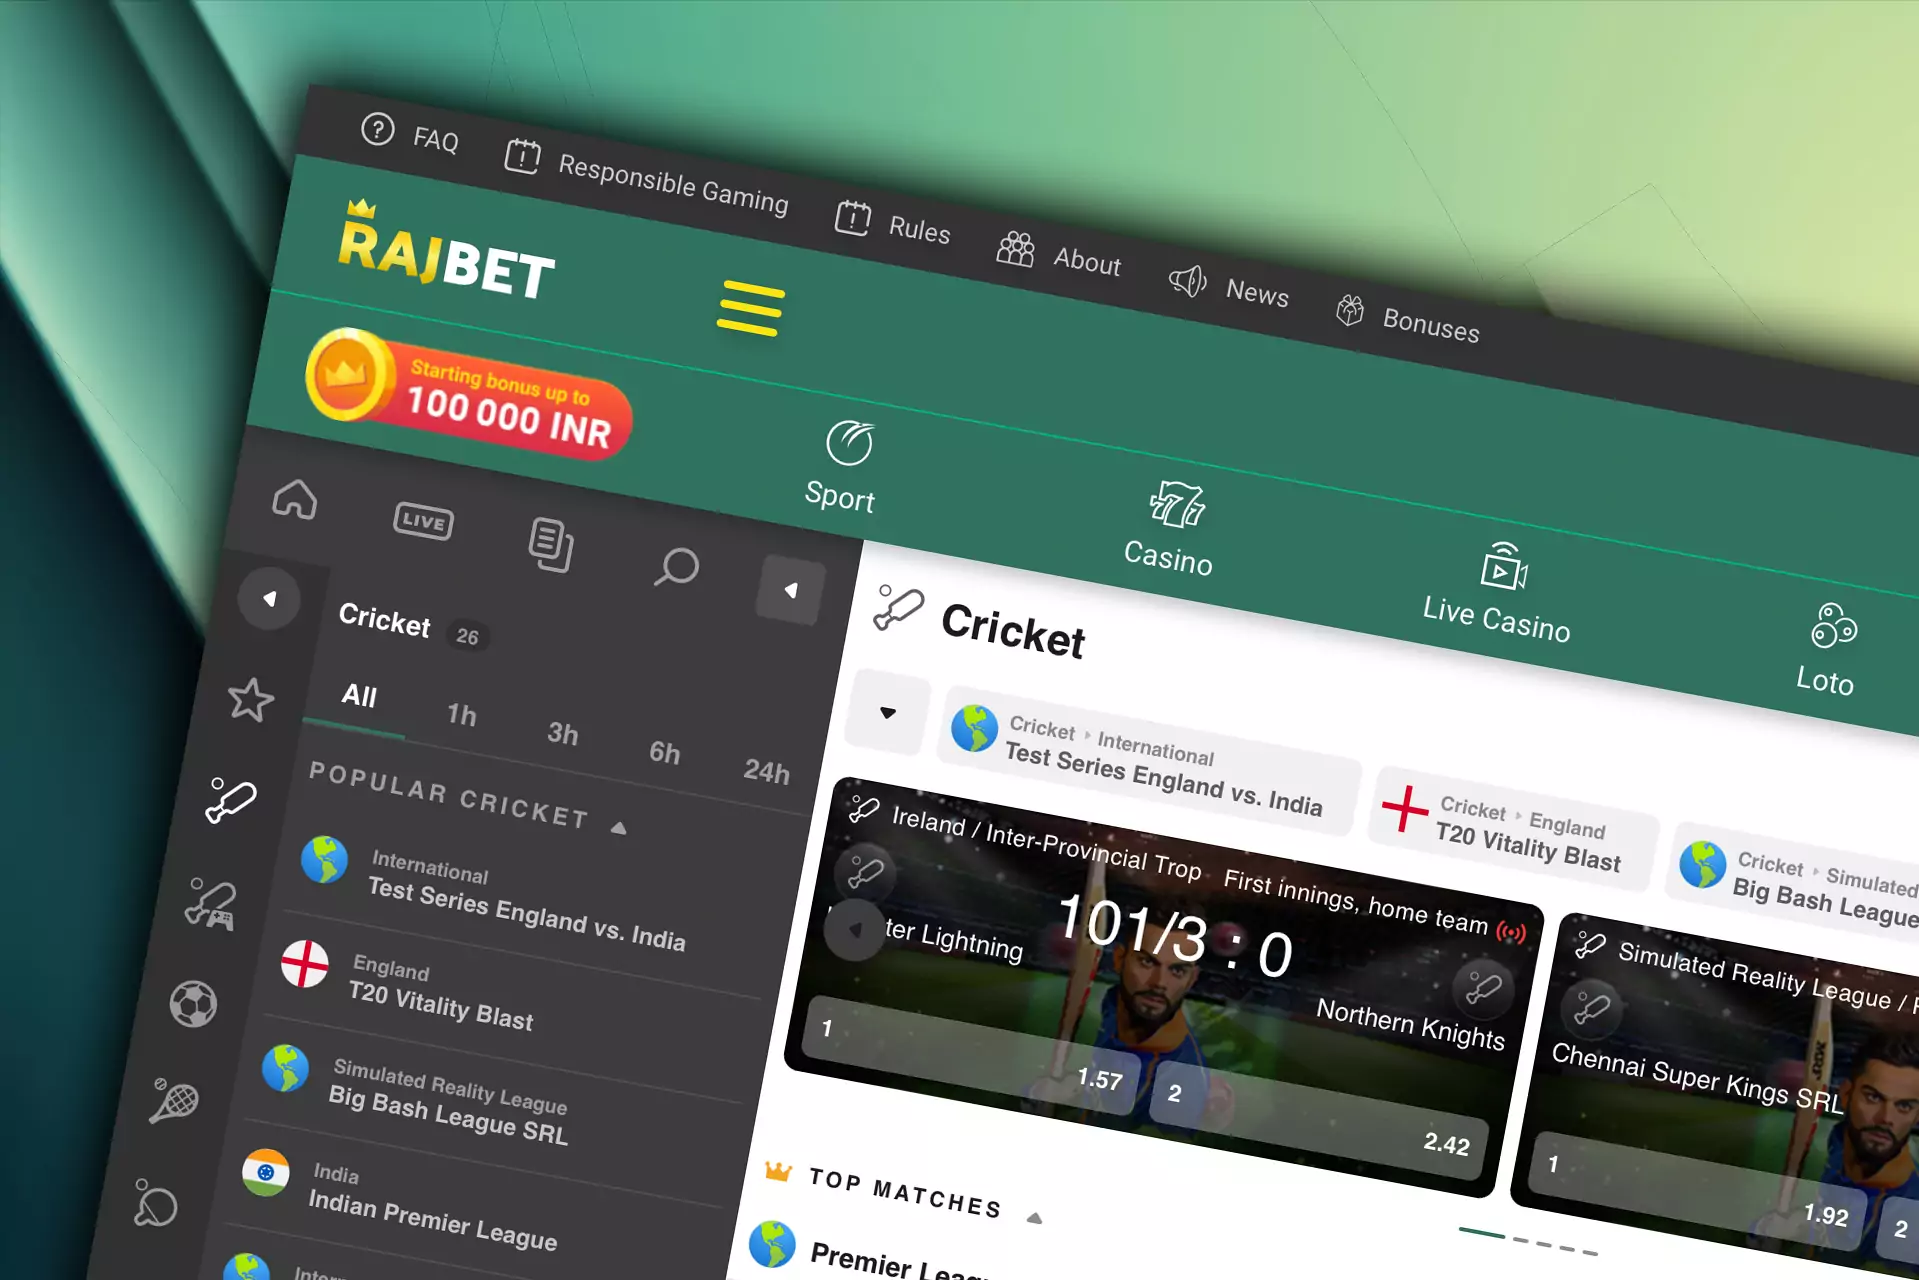 Rajbet supports different types of bets on its website.